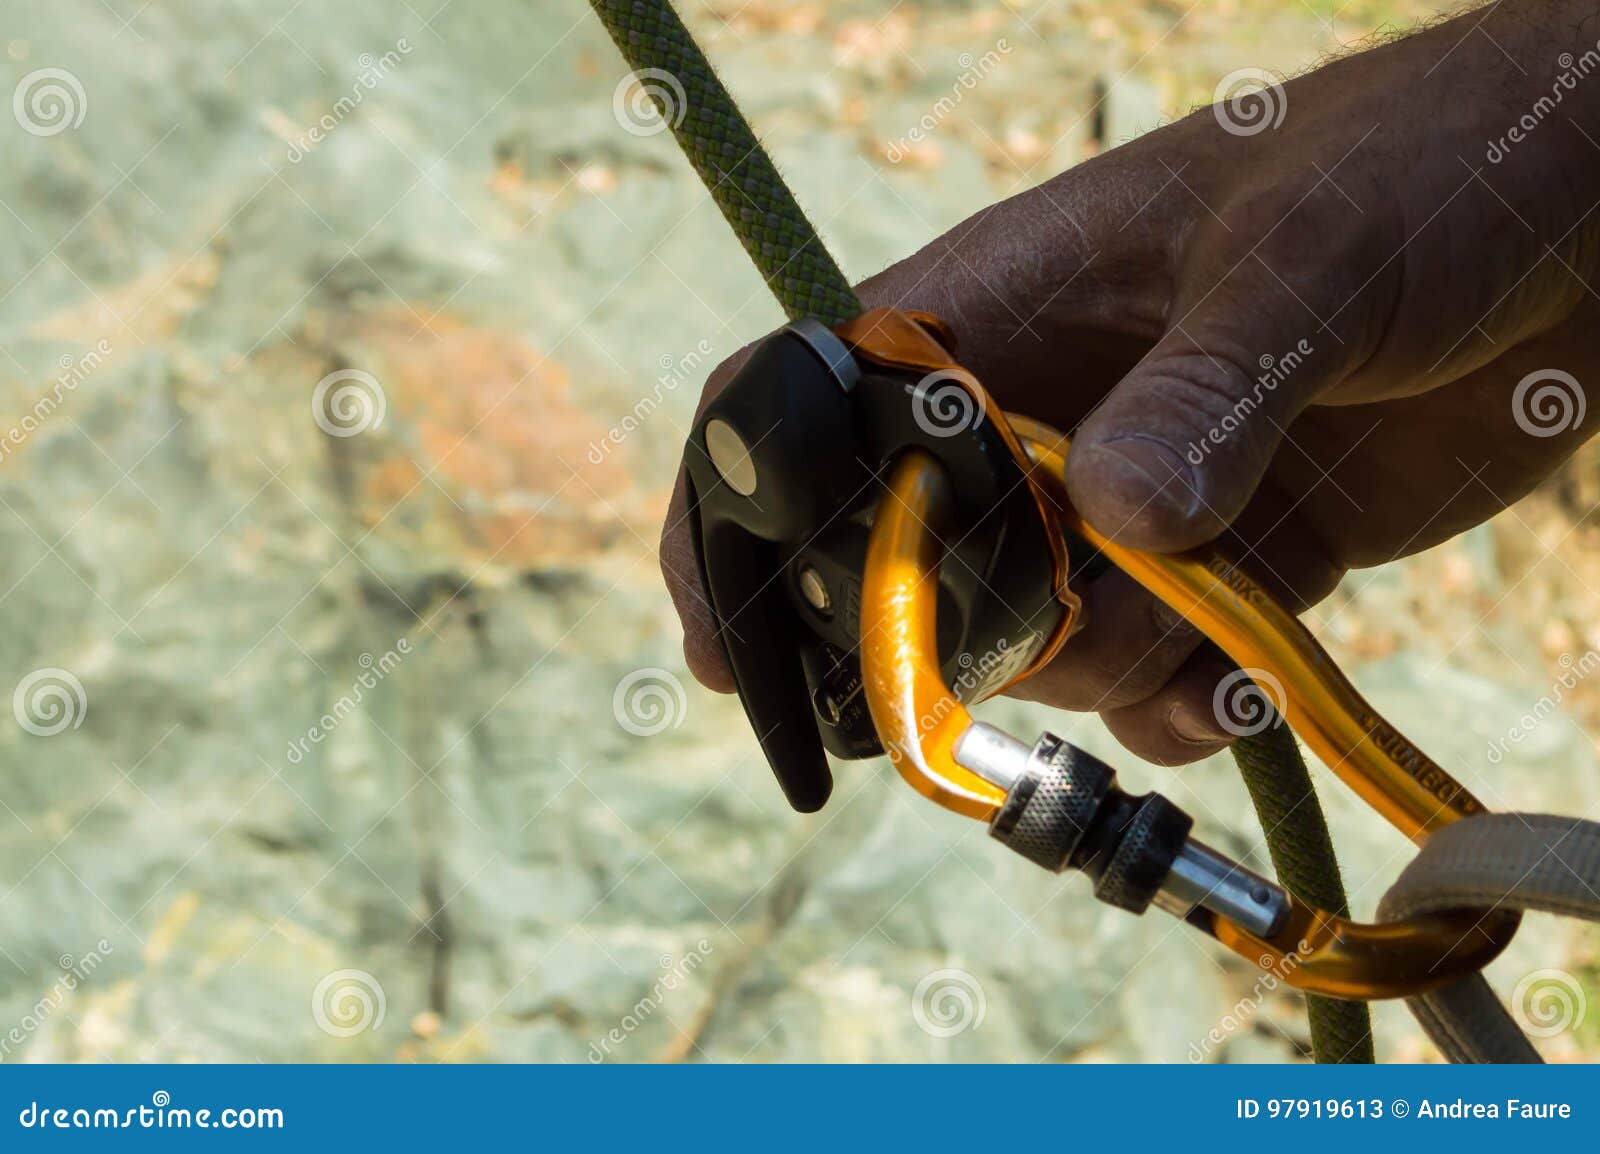 Grigri Stock Photos and Pictures - 518 Images